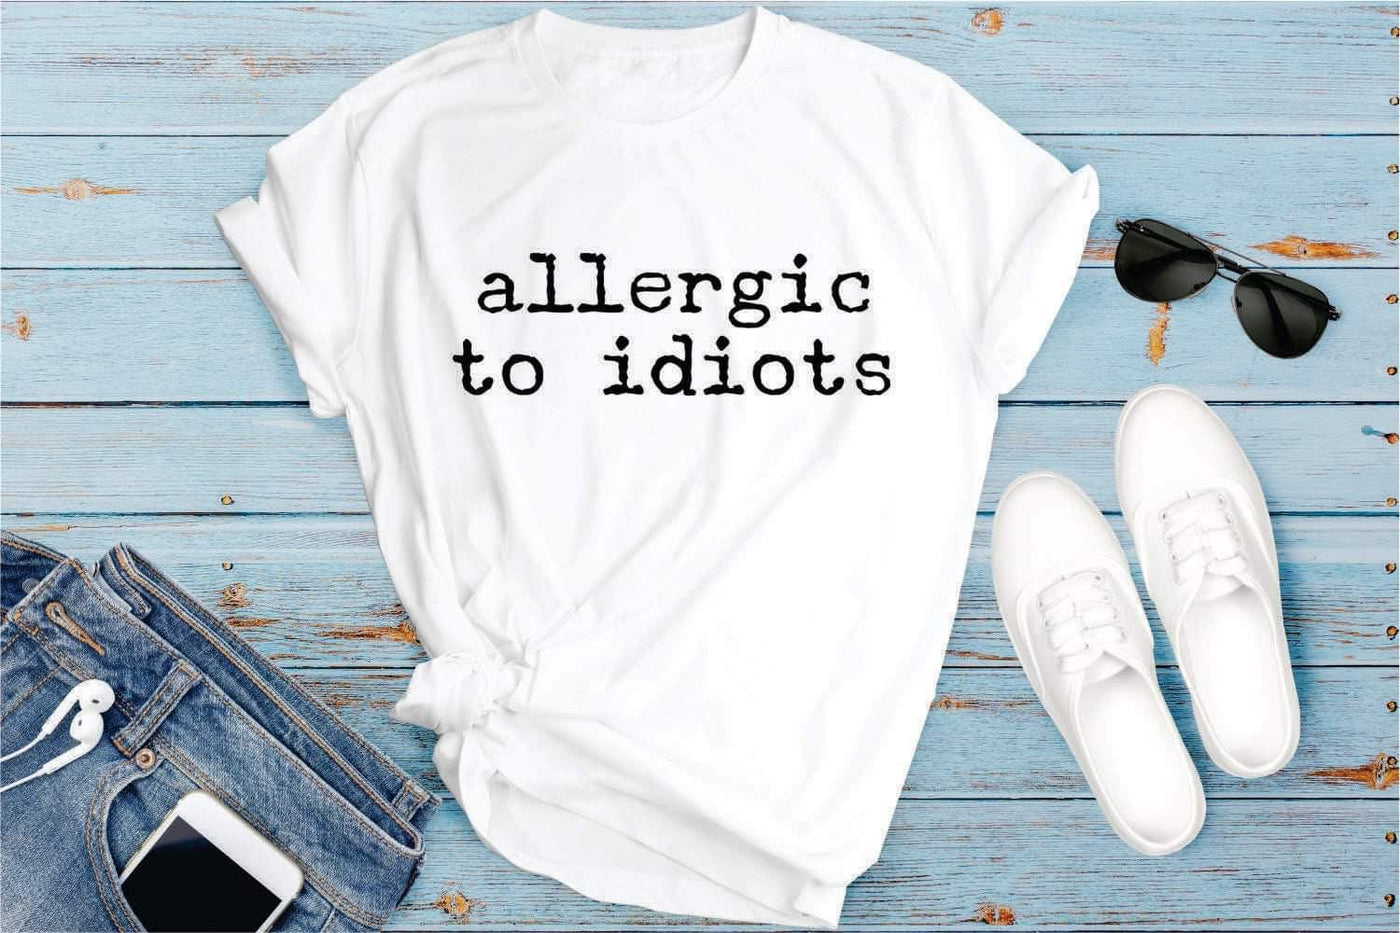 Allergic to Idiots - Grace & Co. Designs 